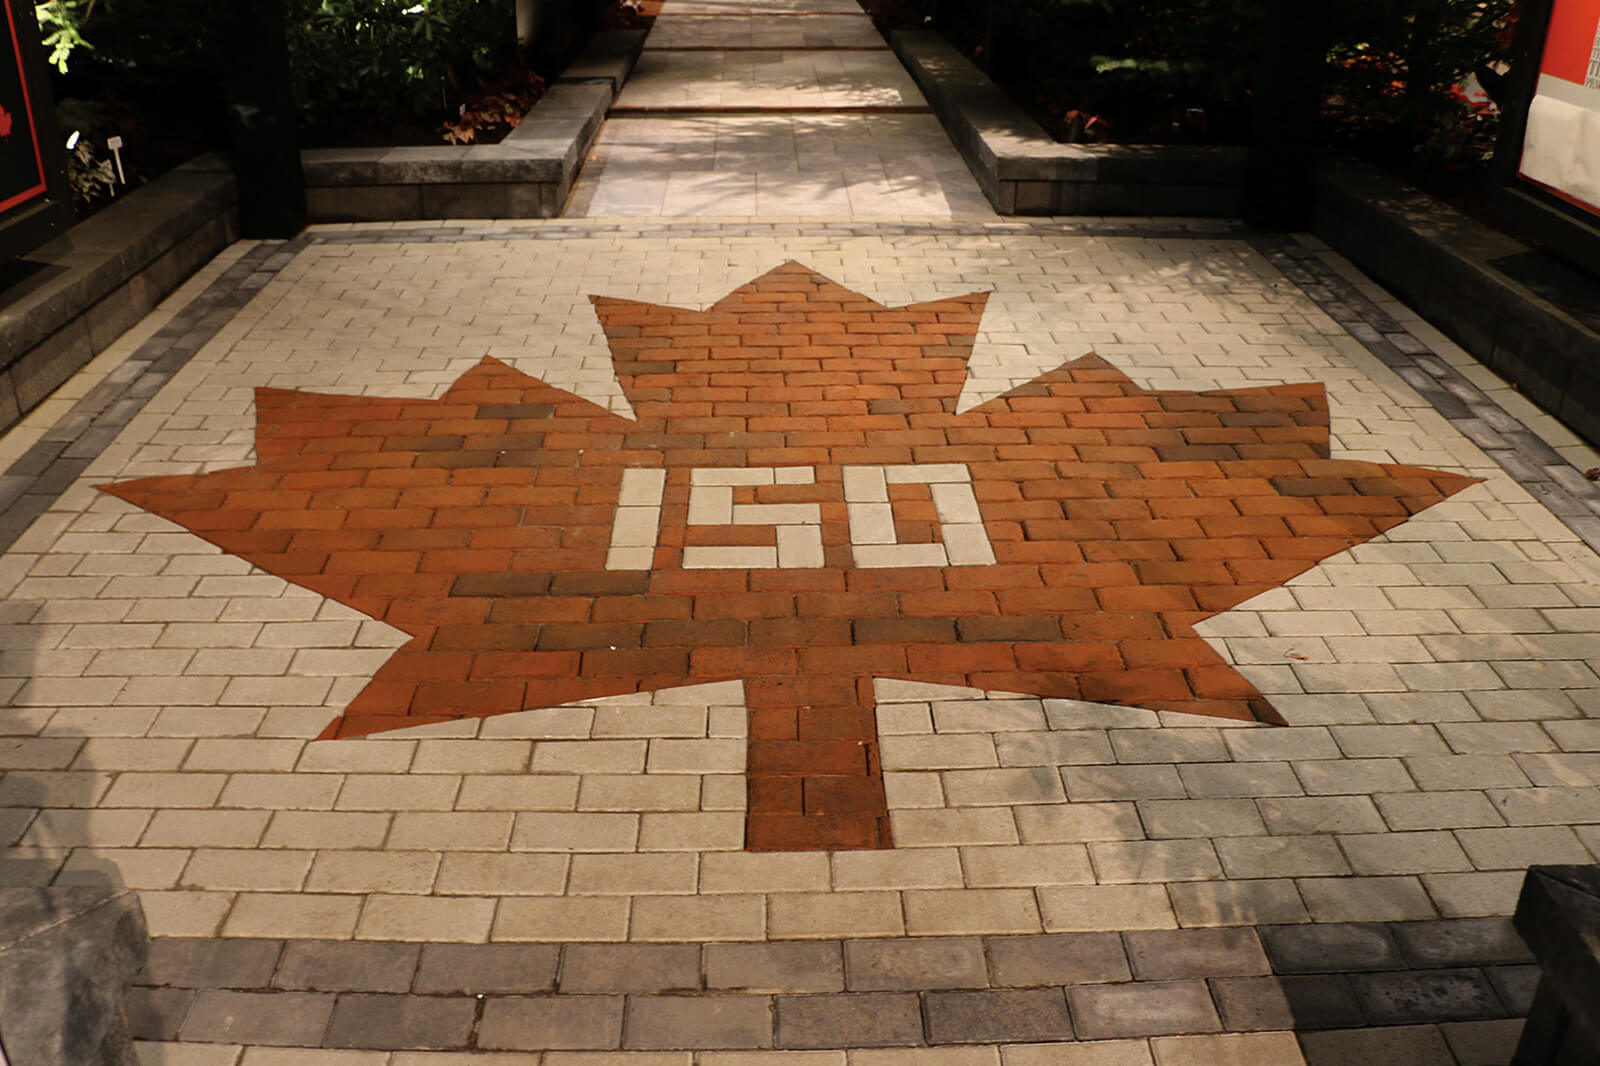 interlocking stone with a red maple leaf pattern and 150 in the centre